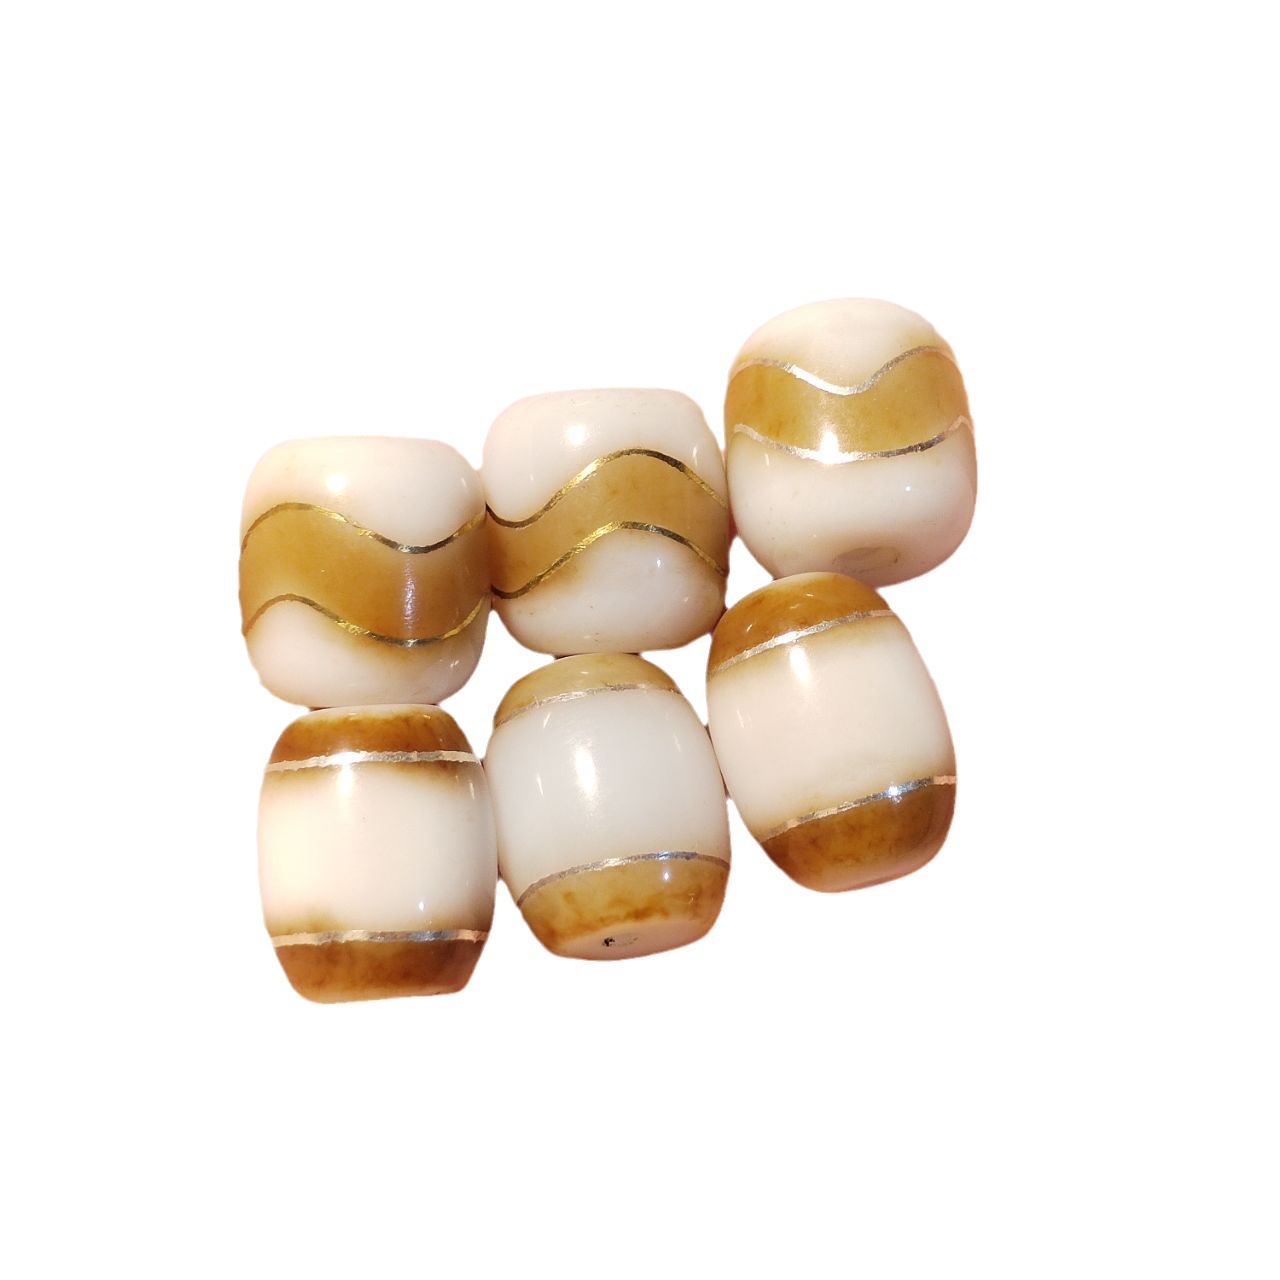 (2) WEN PLAY ׼ TIANZHU SCATTERED BEADS YELLOW TANG COLOR WATERLINE CALCIFIED PORCELAIN WHITE CORE AGATE ǹ TIGER TEETH TIANZHU